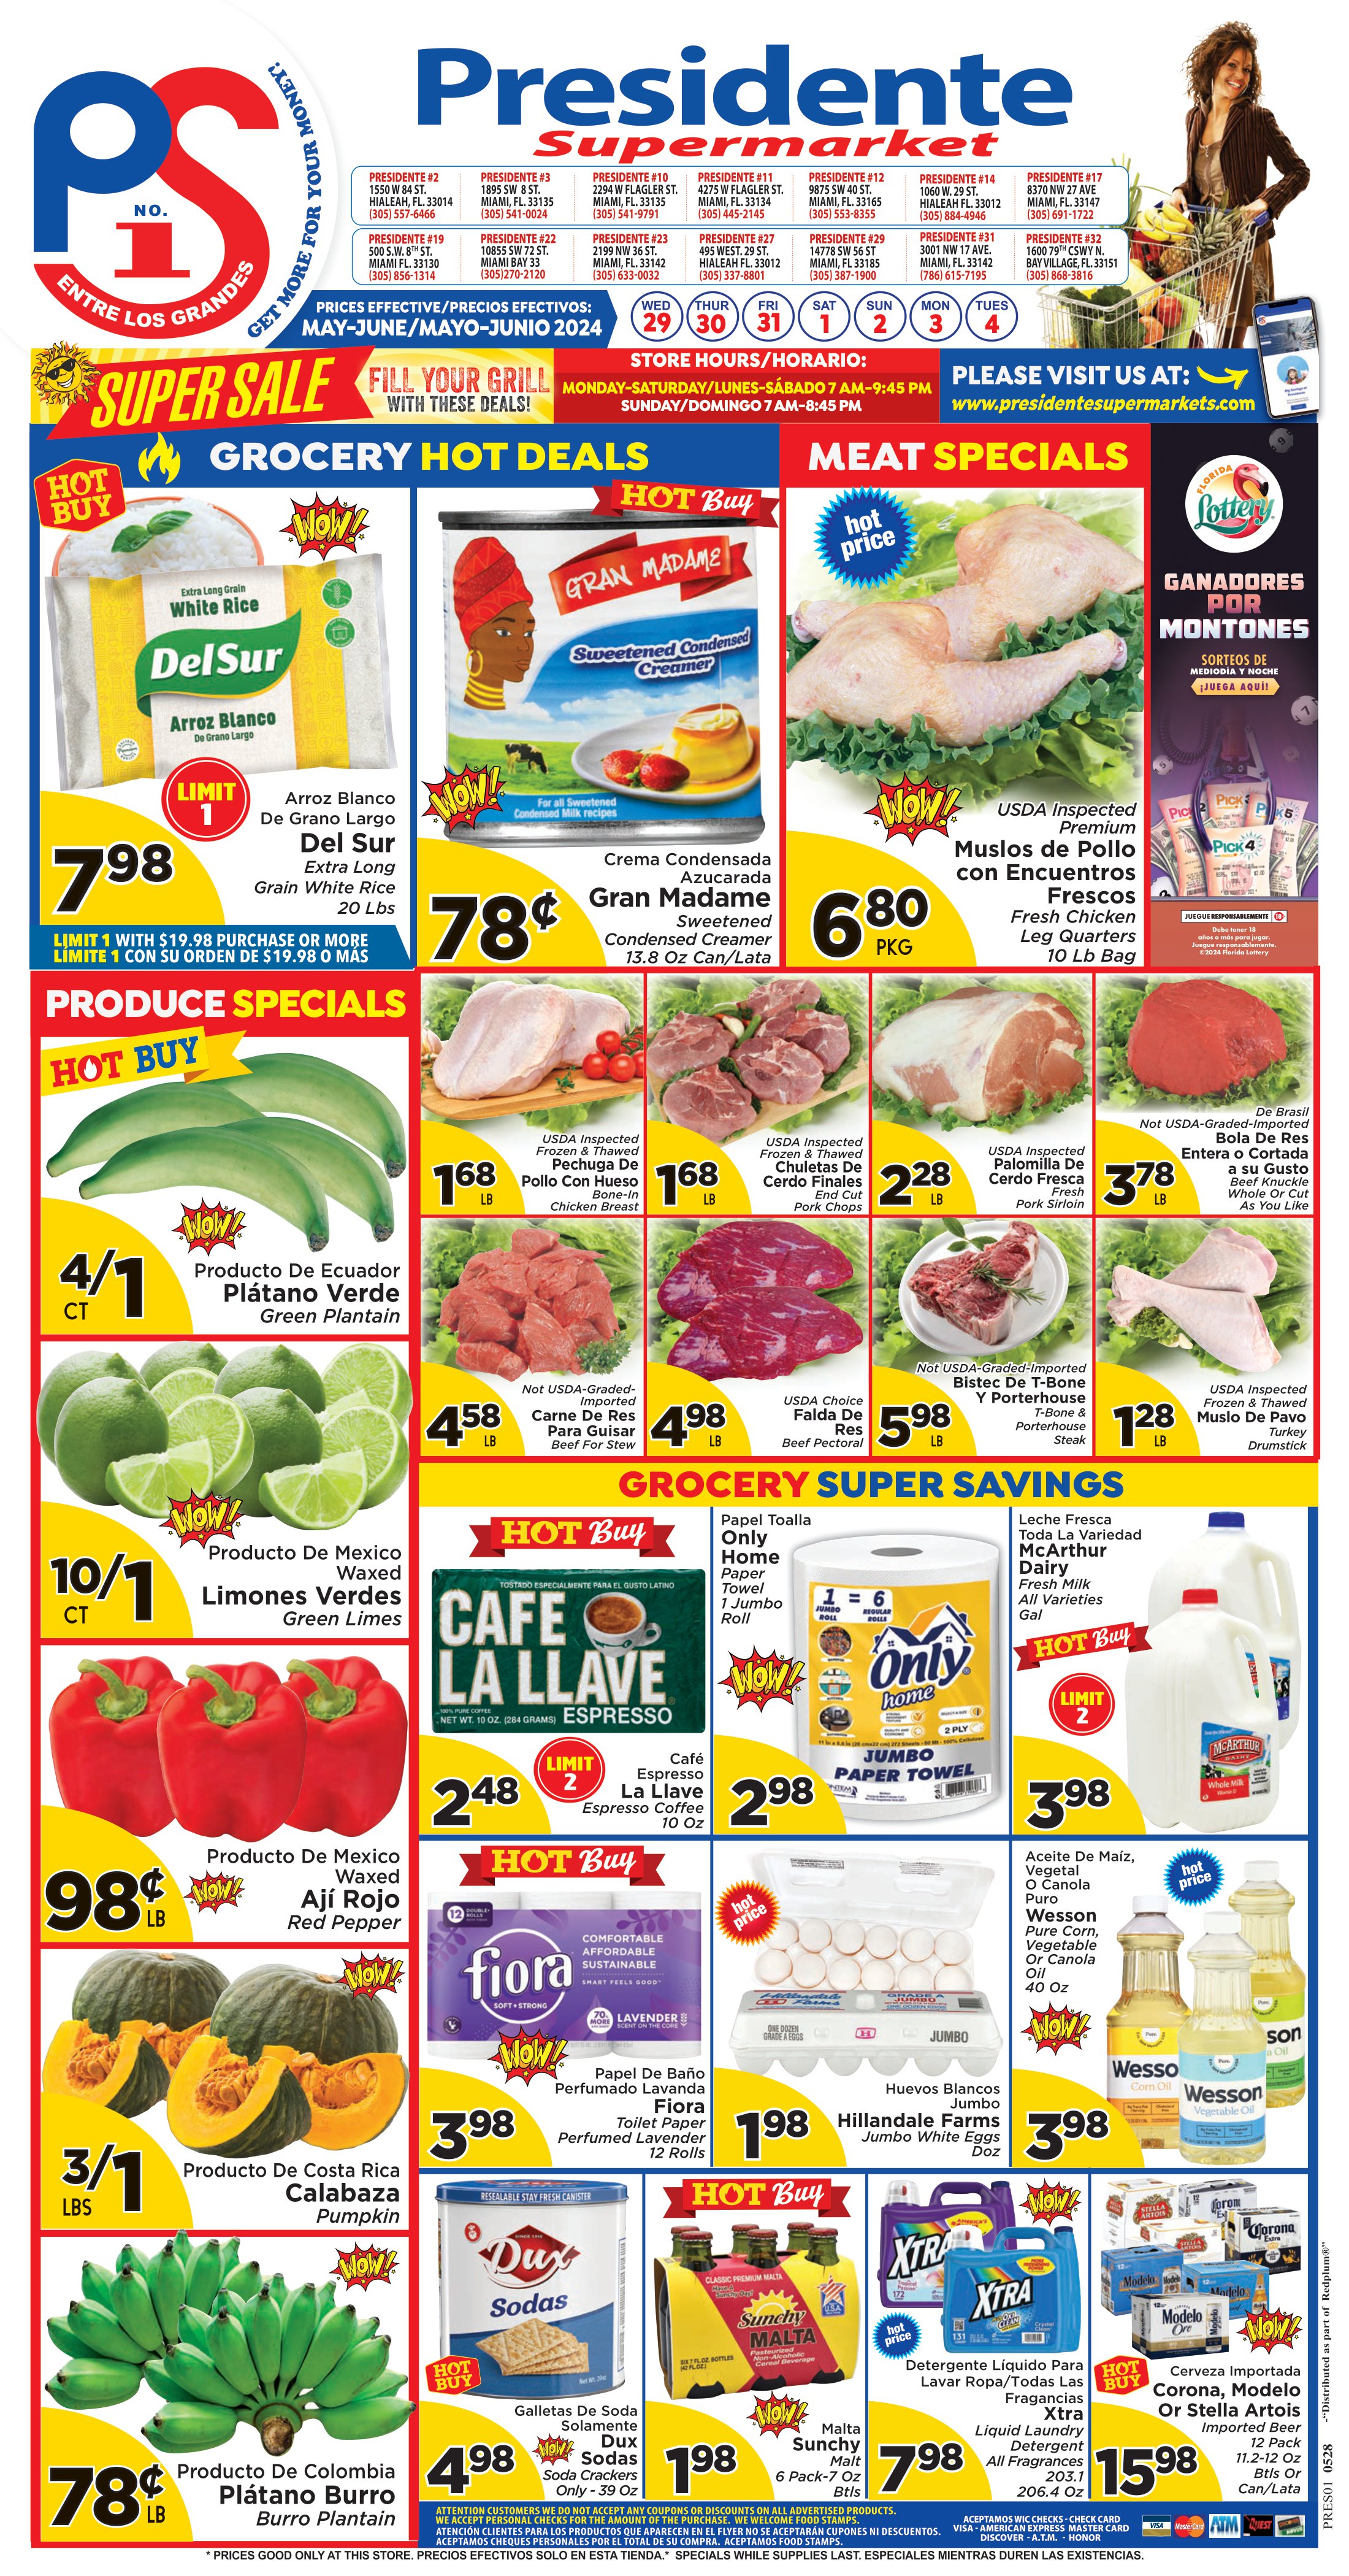 Presidente Supermarket - Weekly Promo for Stores 2, 3, 6, 10, 11, 12, 14, 17, 19, 22, 23, 27, 29, 30, 31, 32 and 44 Page 1